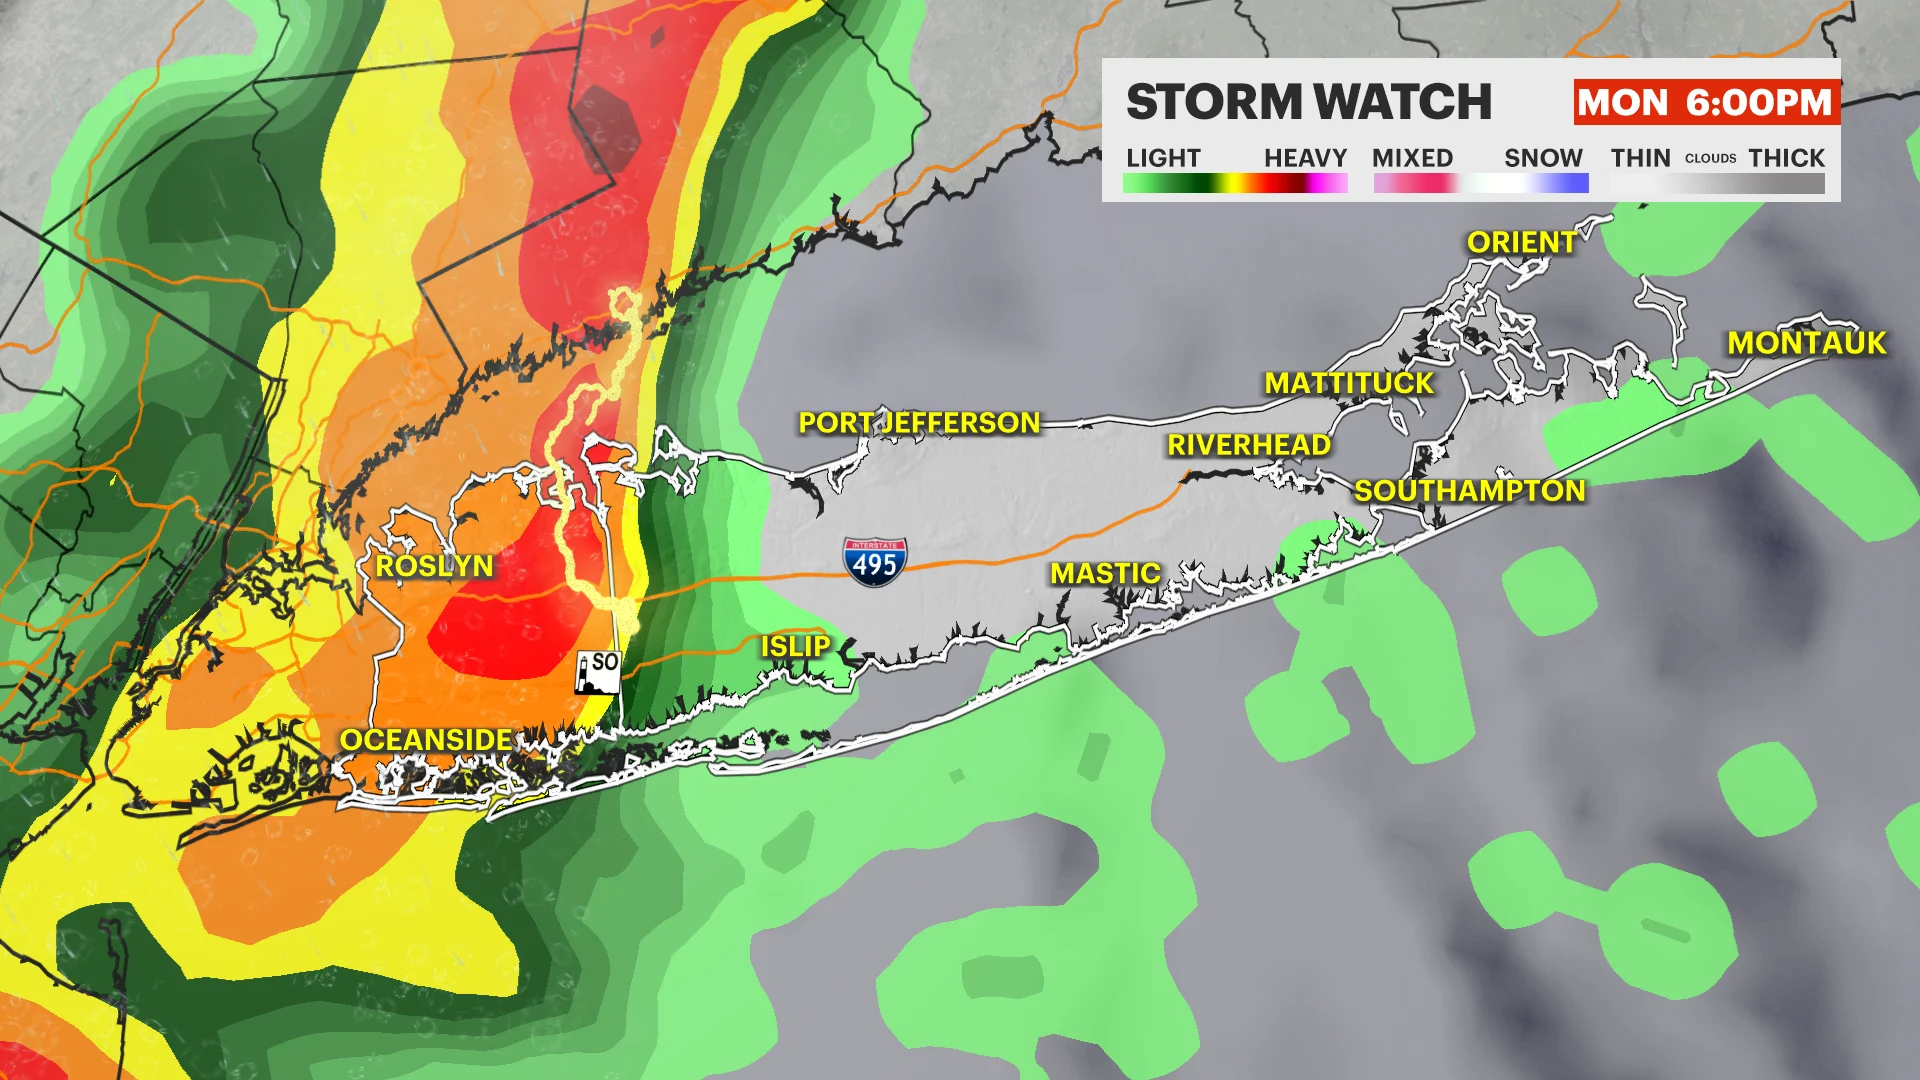 Storm Watch: Severe storms possible with heavy rain, strong wind and hail across Long Island 